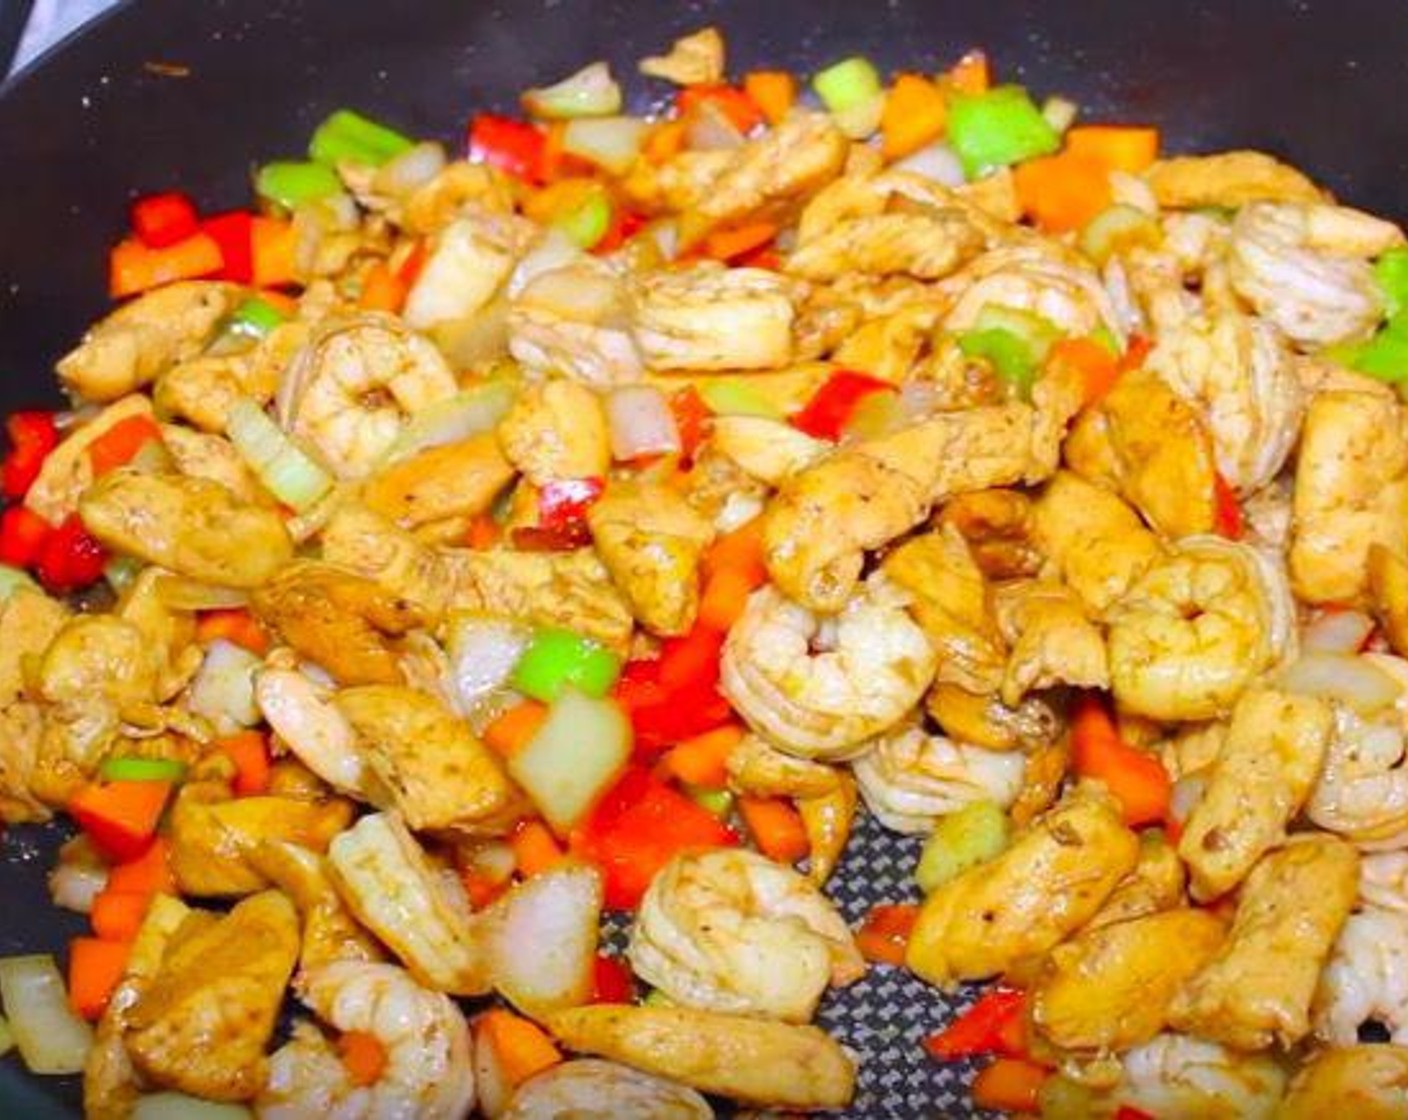 step 3 In the same pan, cook chicken and Shrimp (24), Onion (1), Celery (2 stalks), Carrot (1), Red Bell Pepper (1), Cubanelle Pepper (1/2). Add a little soy sauce to give flavor. Mix it for about 3 minutes or until the carrot is soft.